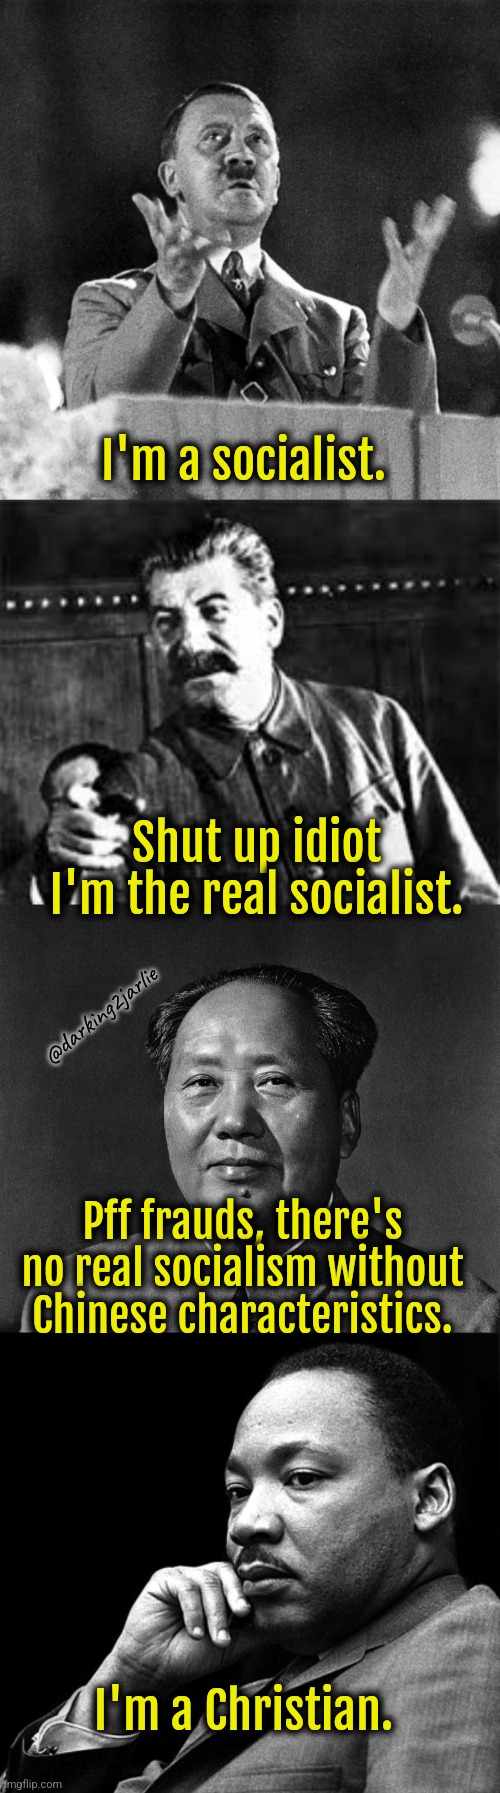 A real diamond doesn't need to brag its value. | I'm a socialist. Shut up idiot I'm the real socialist. @darking2jarlie; Pff frauds, there's no real socialism without Chinese characteristics. I'm a Christian. | image tagged in socialism,socialist,communism,marxism,nazis,mlk | made w/ Imgflip meme maker